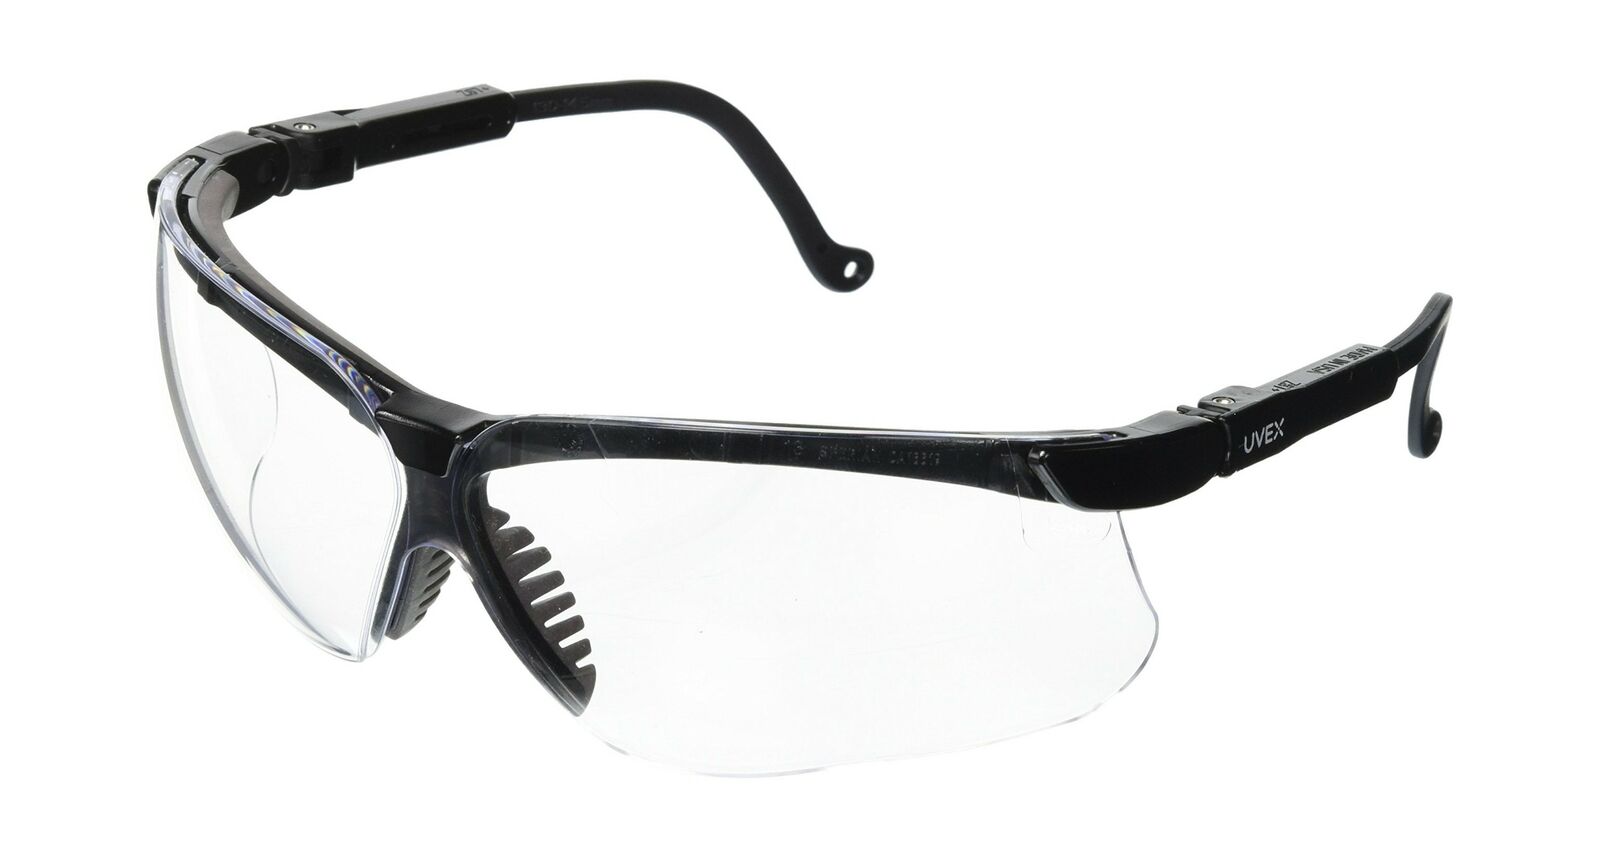 Details about   Safety Glasses & Sunglasses Uvex Genesis Military Issue Protection Rothco 10339 